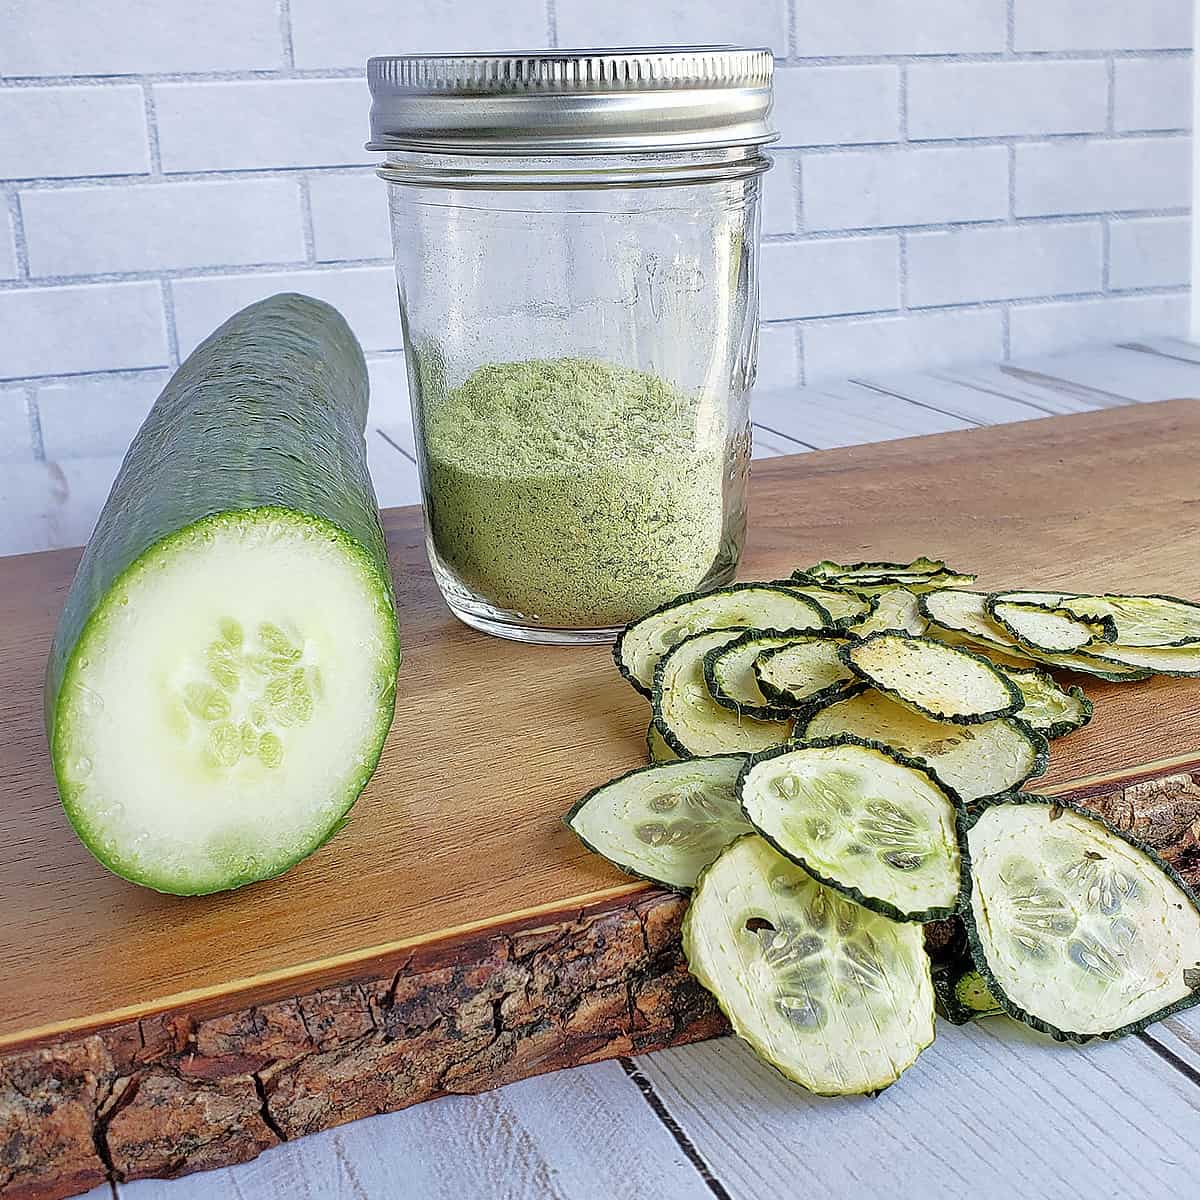 English cucumber sliced, a jar of cucumber powder, and dehydrated cucumbers on a wooden serving tray